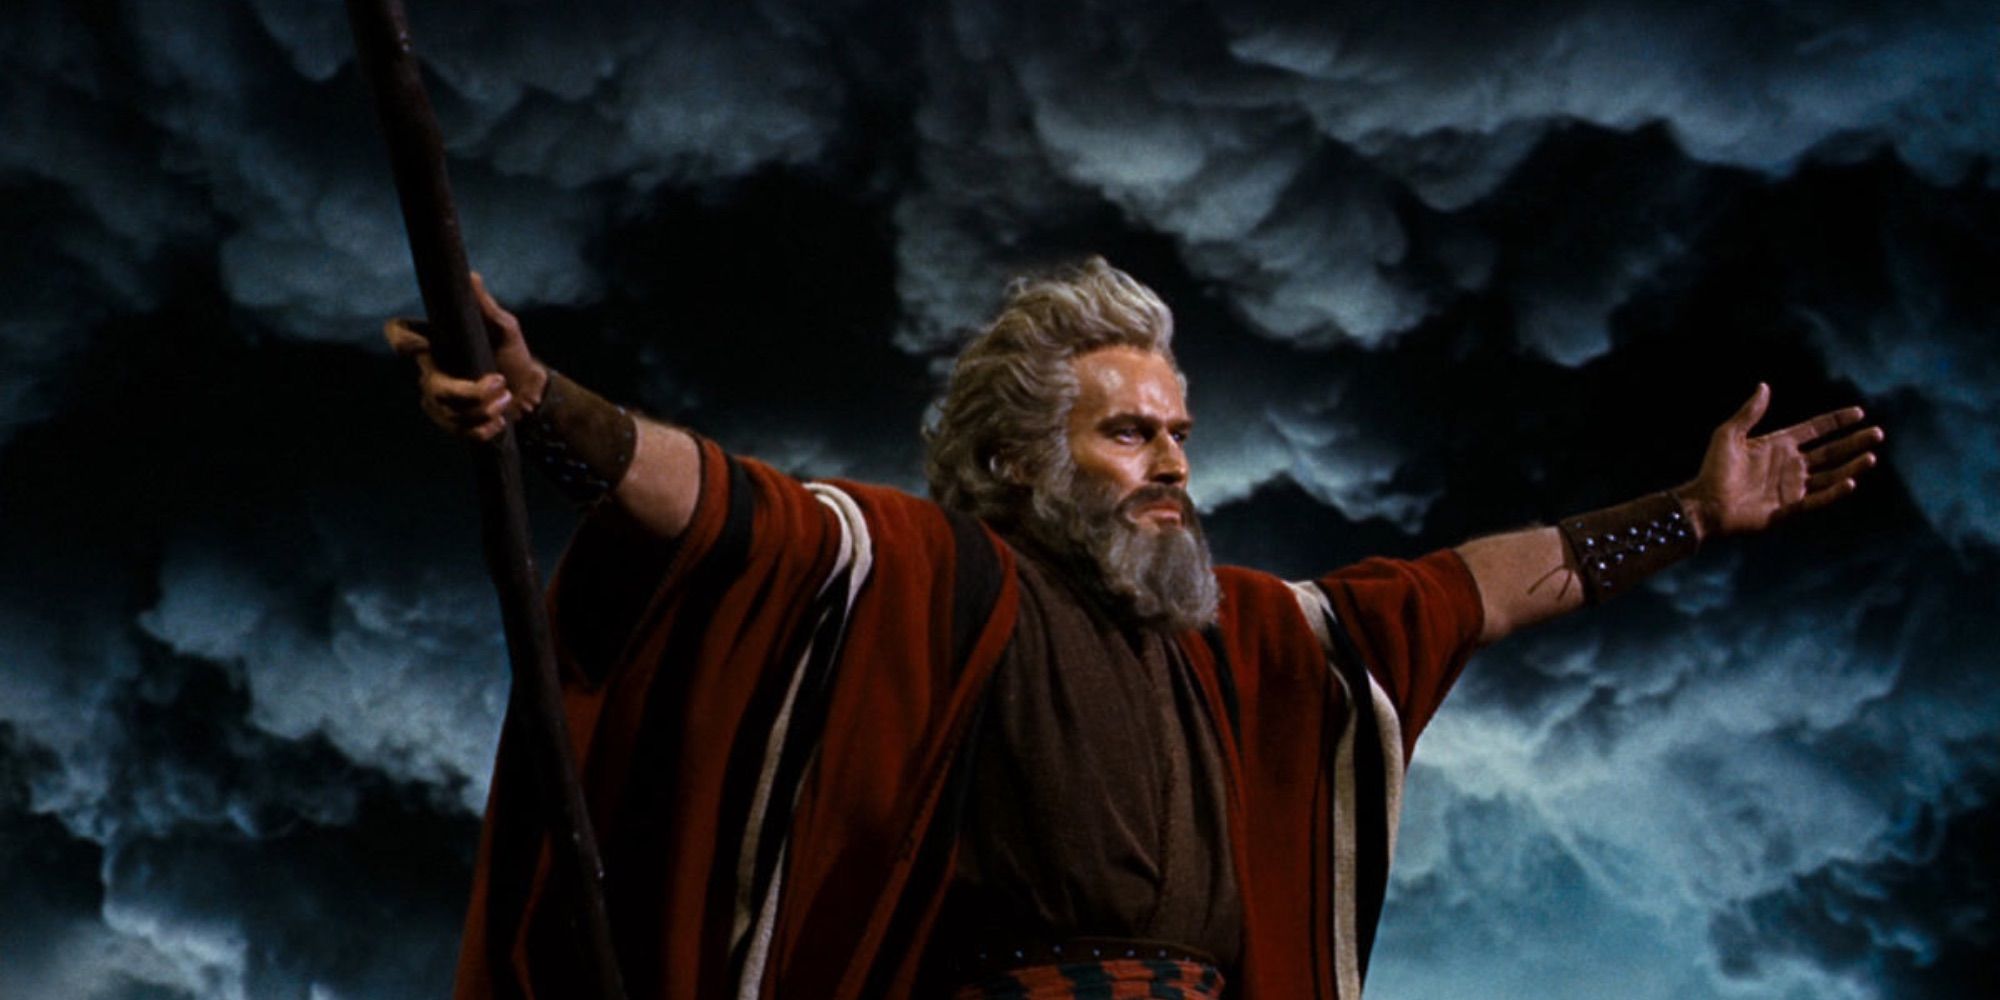 Charlton Heston as Moses with his arms raised in 'The Ten Commandments'